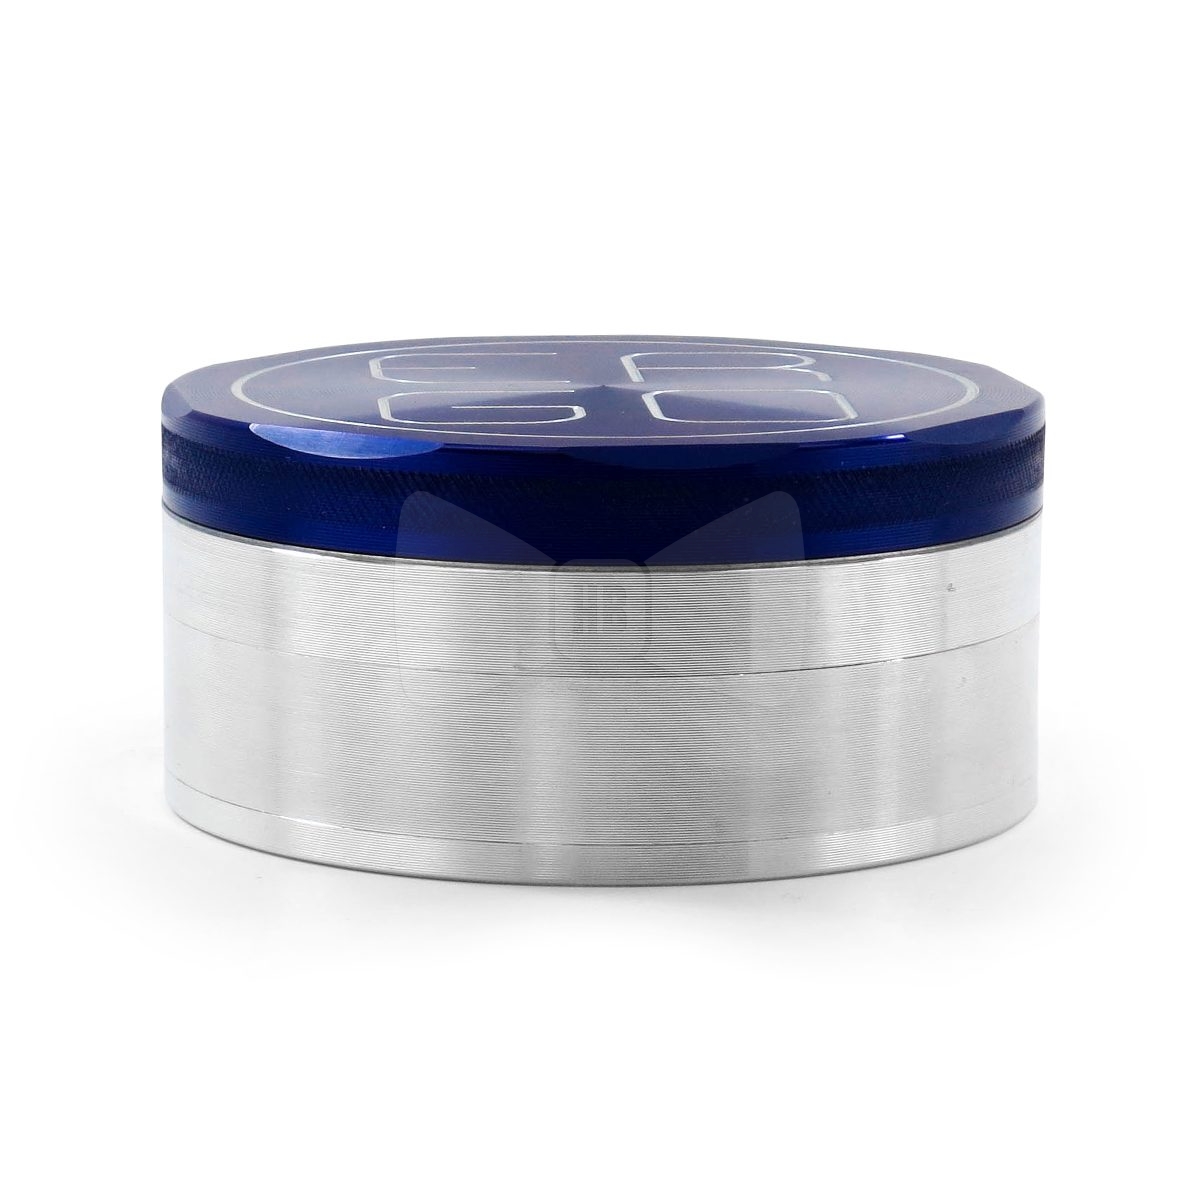 ERGO 4 Piece 110mm Grinder with Removable Screen Blue